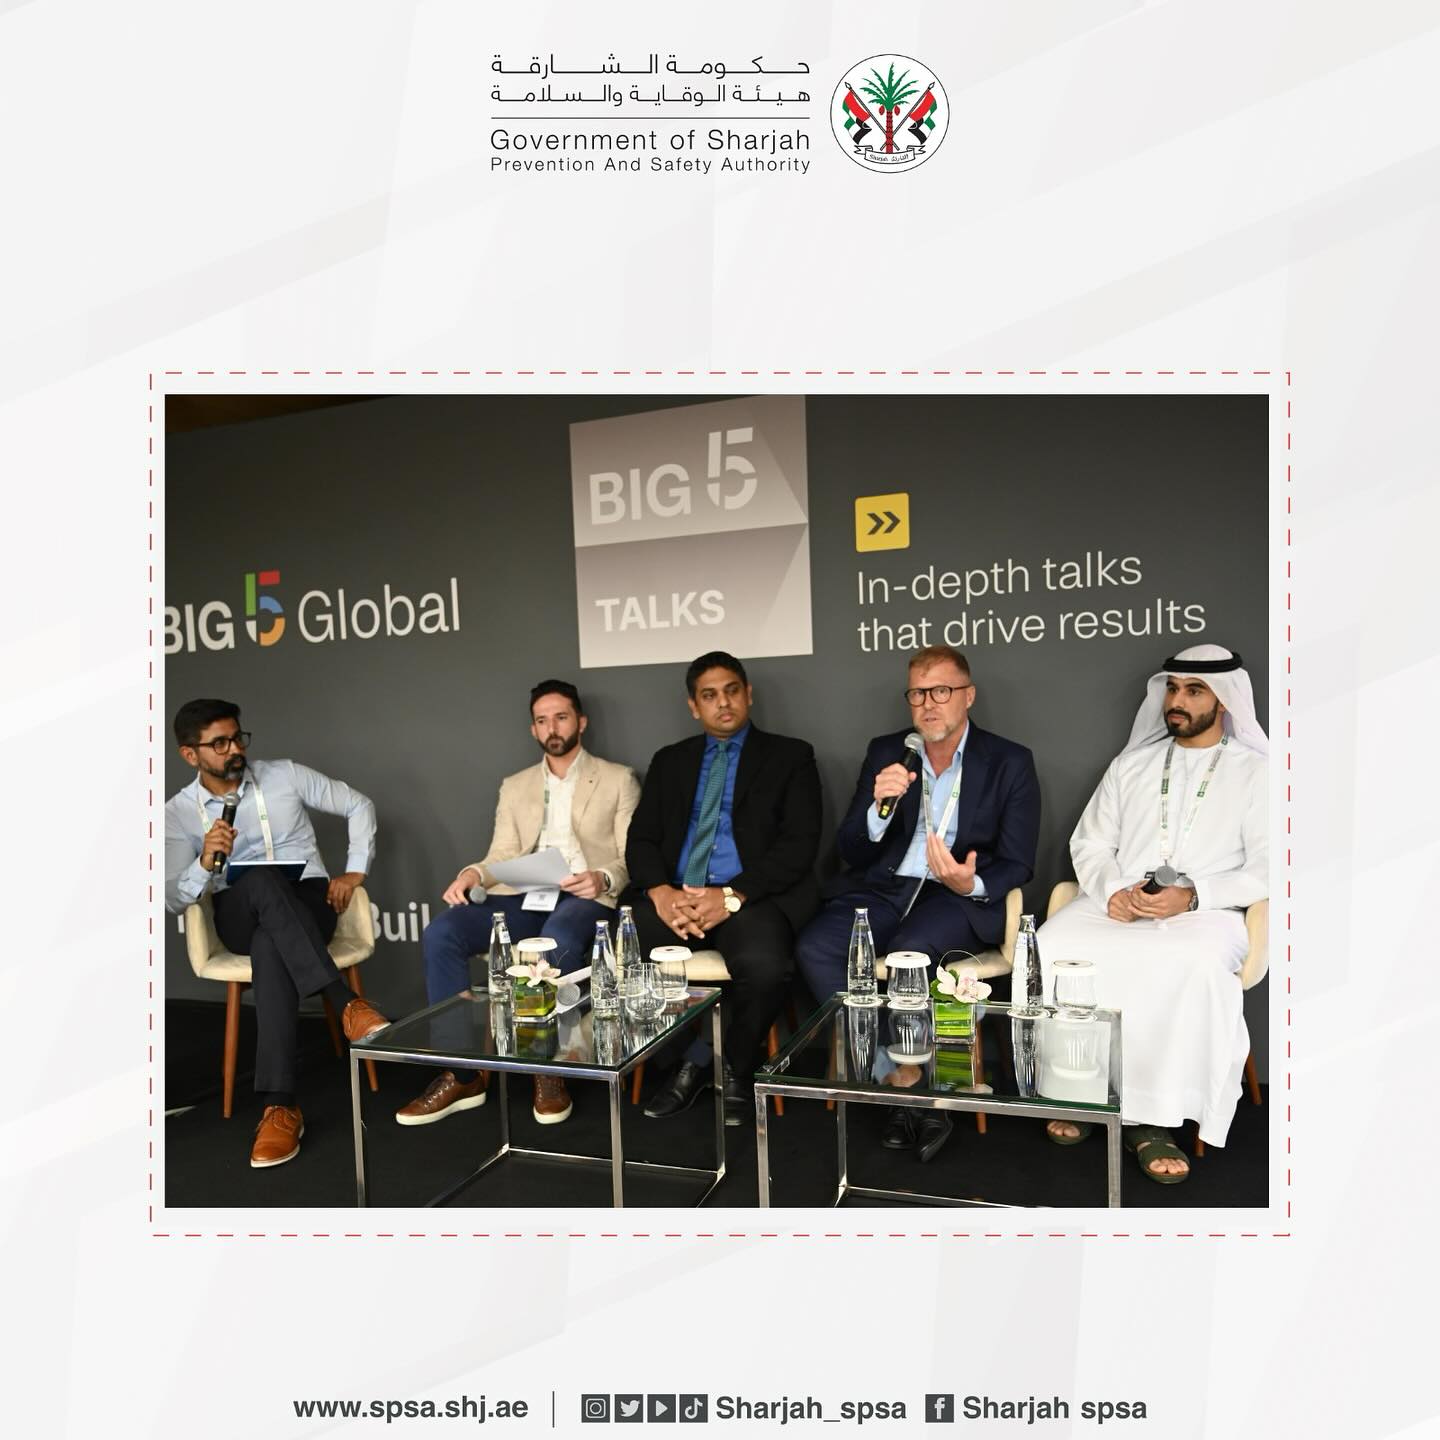 Prevention and Safety Authority participated in the Big 5 Global exhibition